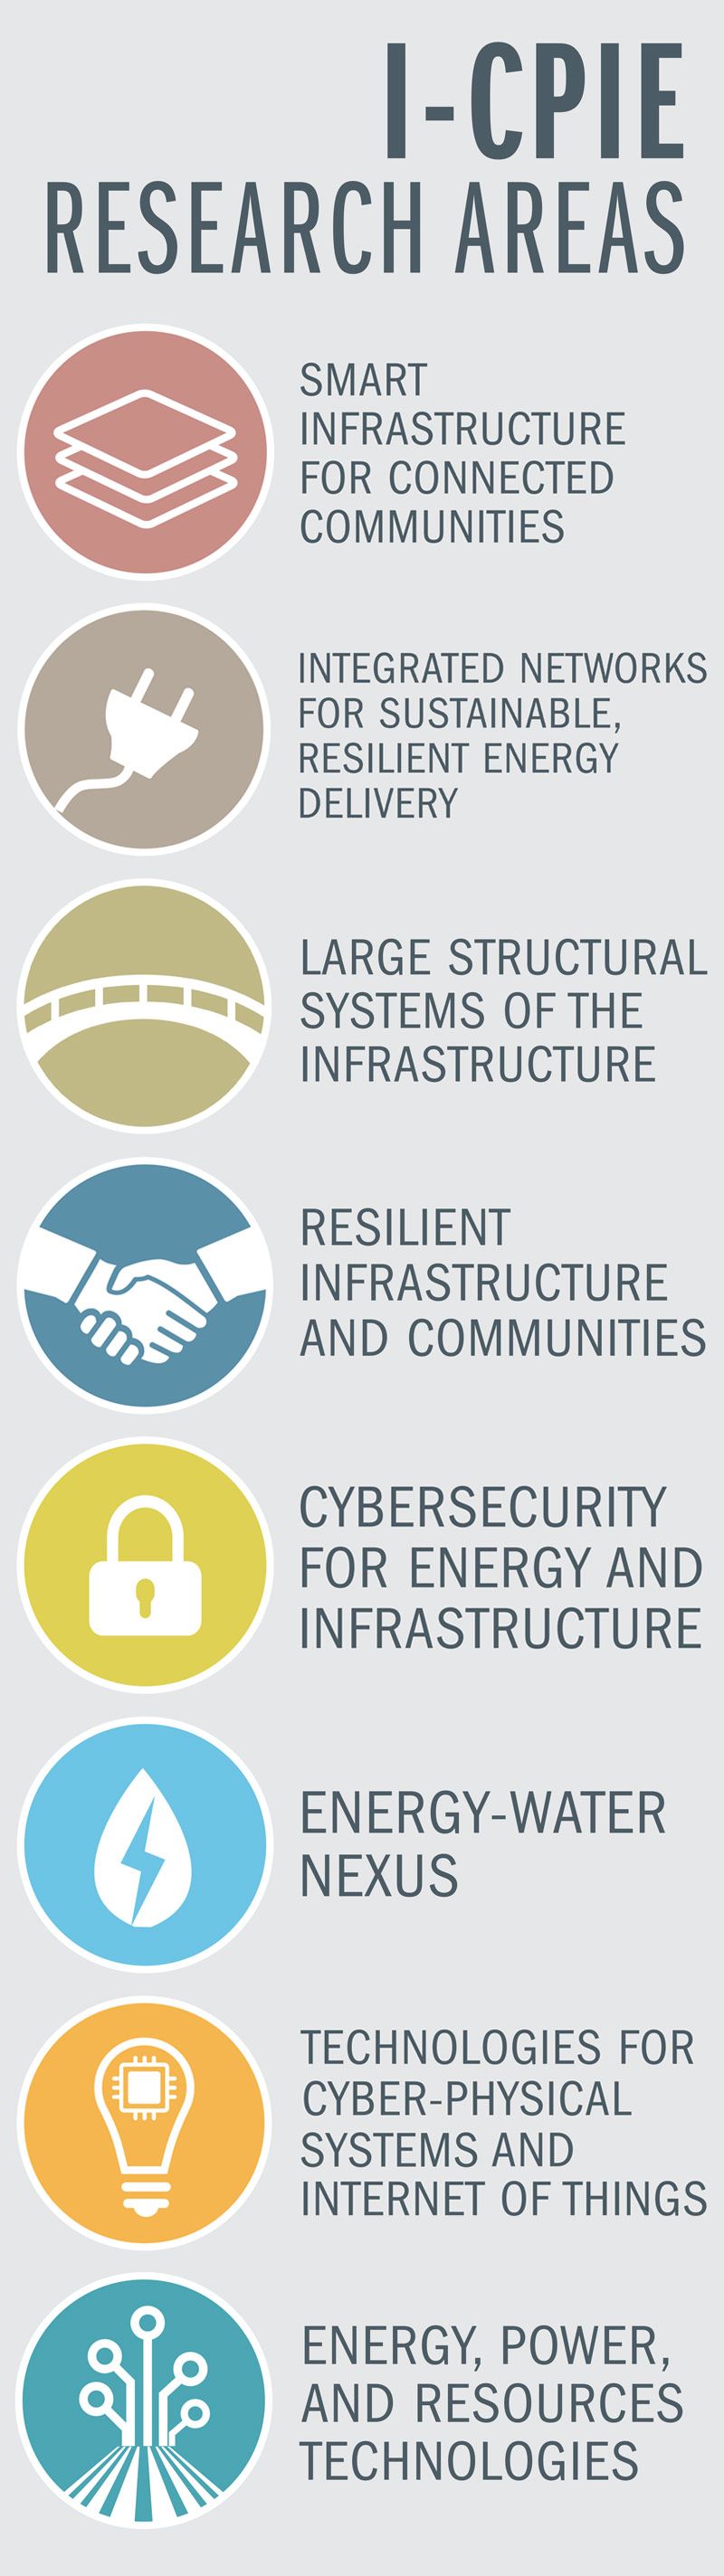 Institute for Cyber Physical Infrastructure and Energy (I-CPIE)